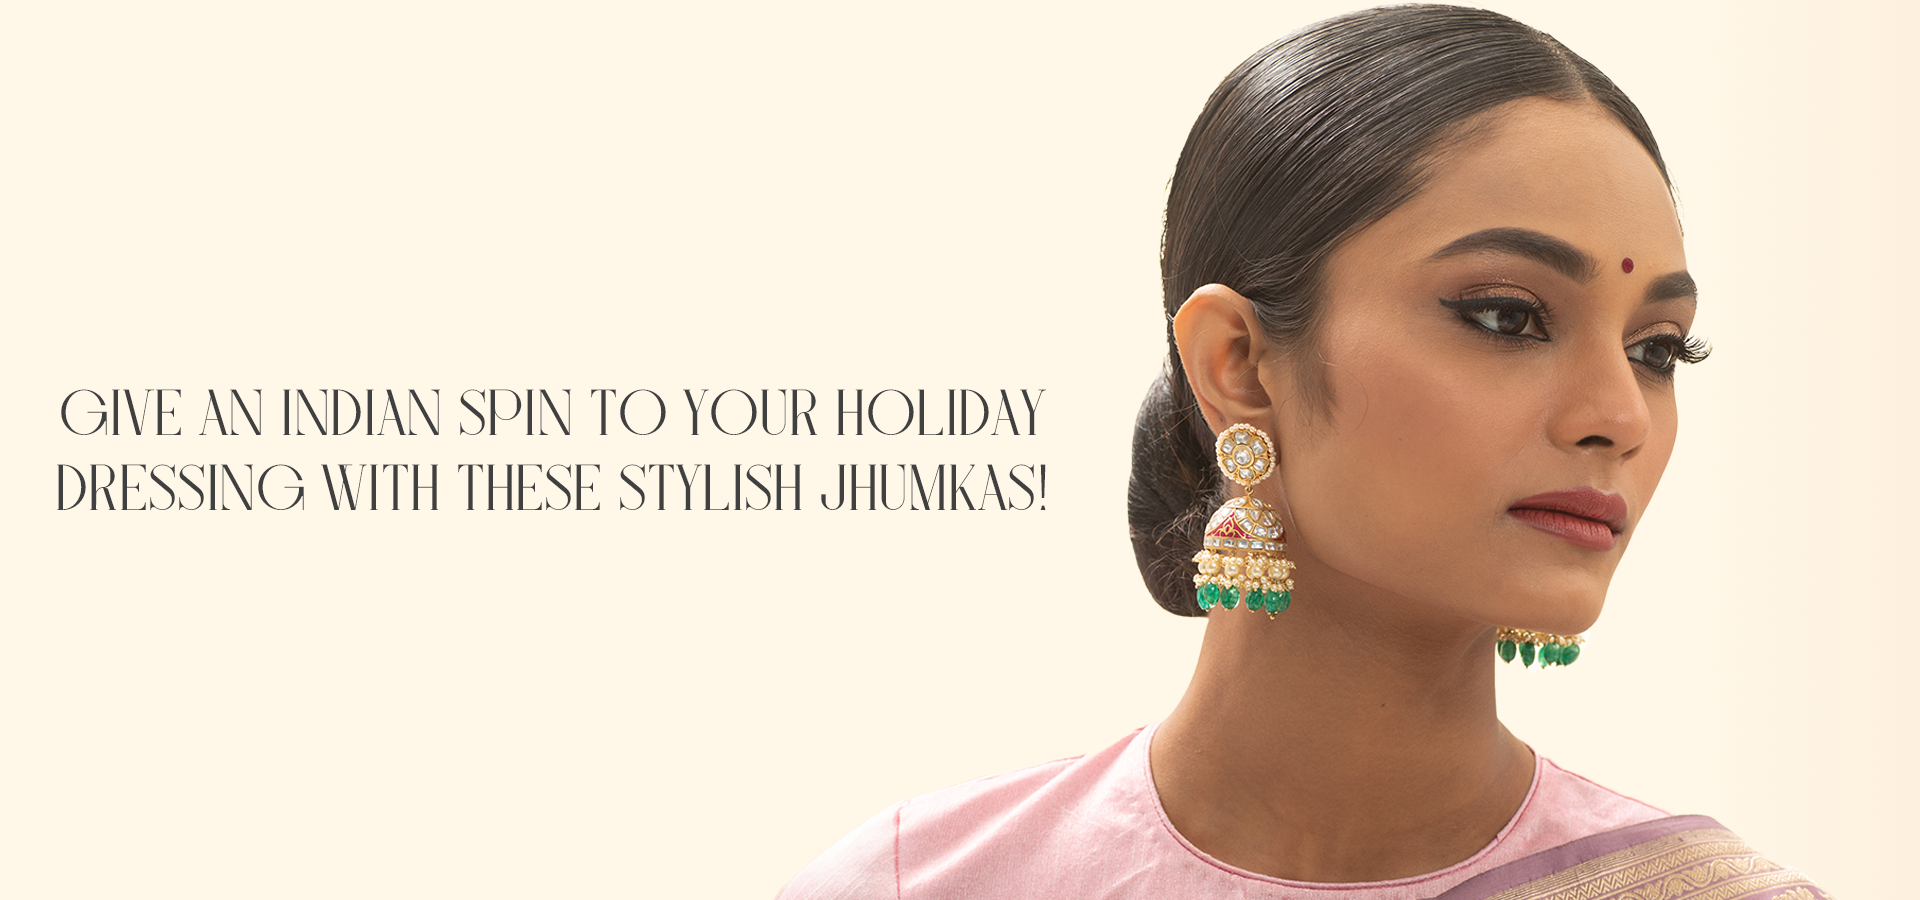 Give an Indian spin to your holiday dressing with these stylish Jhumkas!